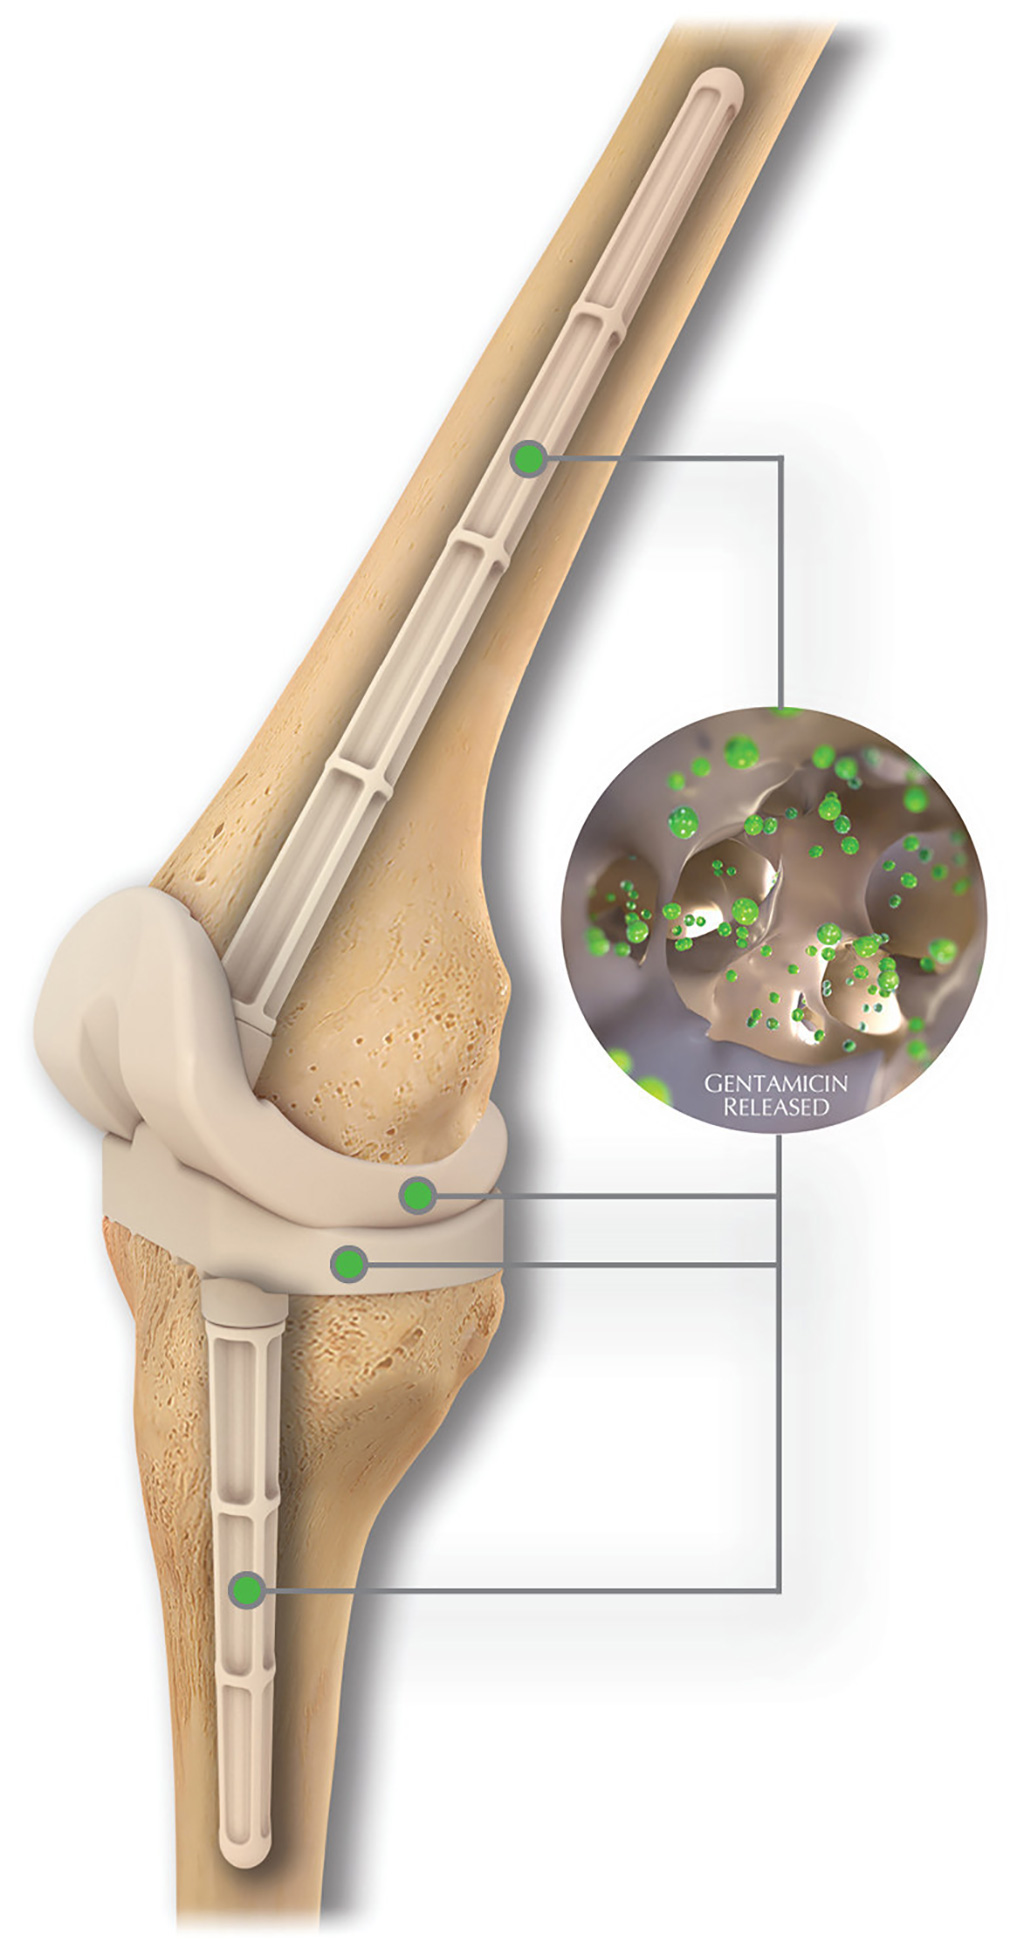 Image: The REMEDY Stemmed Knee Spacer (Photo courtesy of OsteoRemedies)